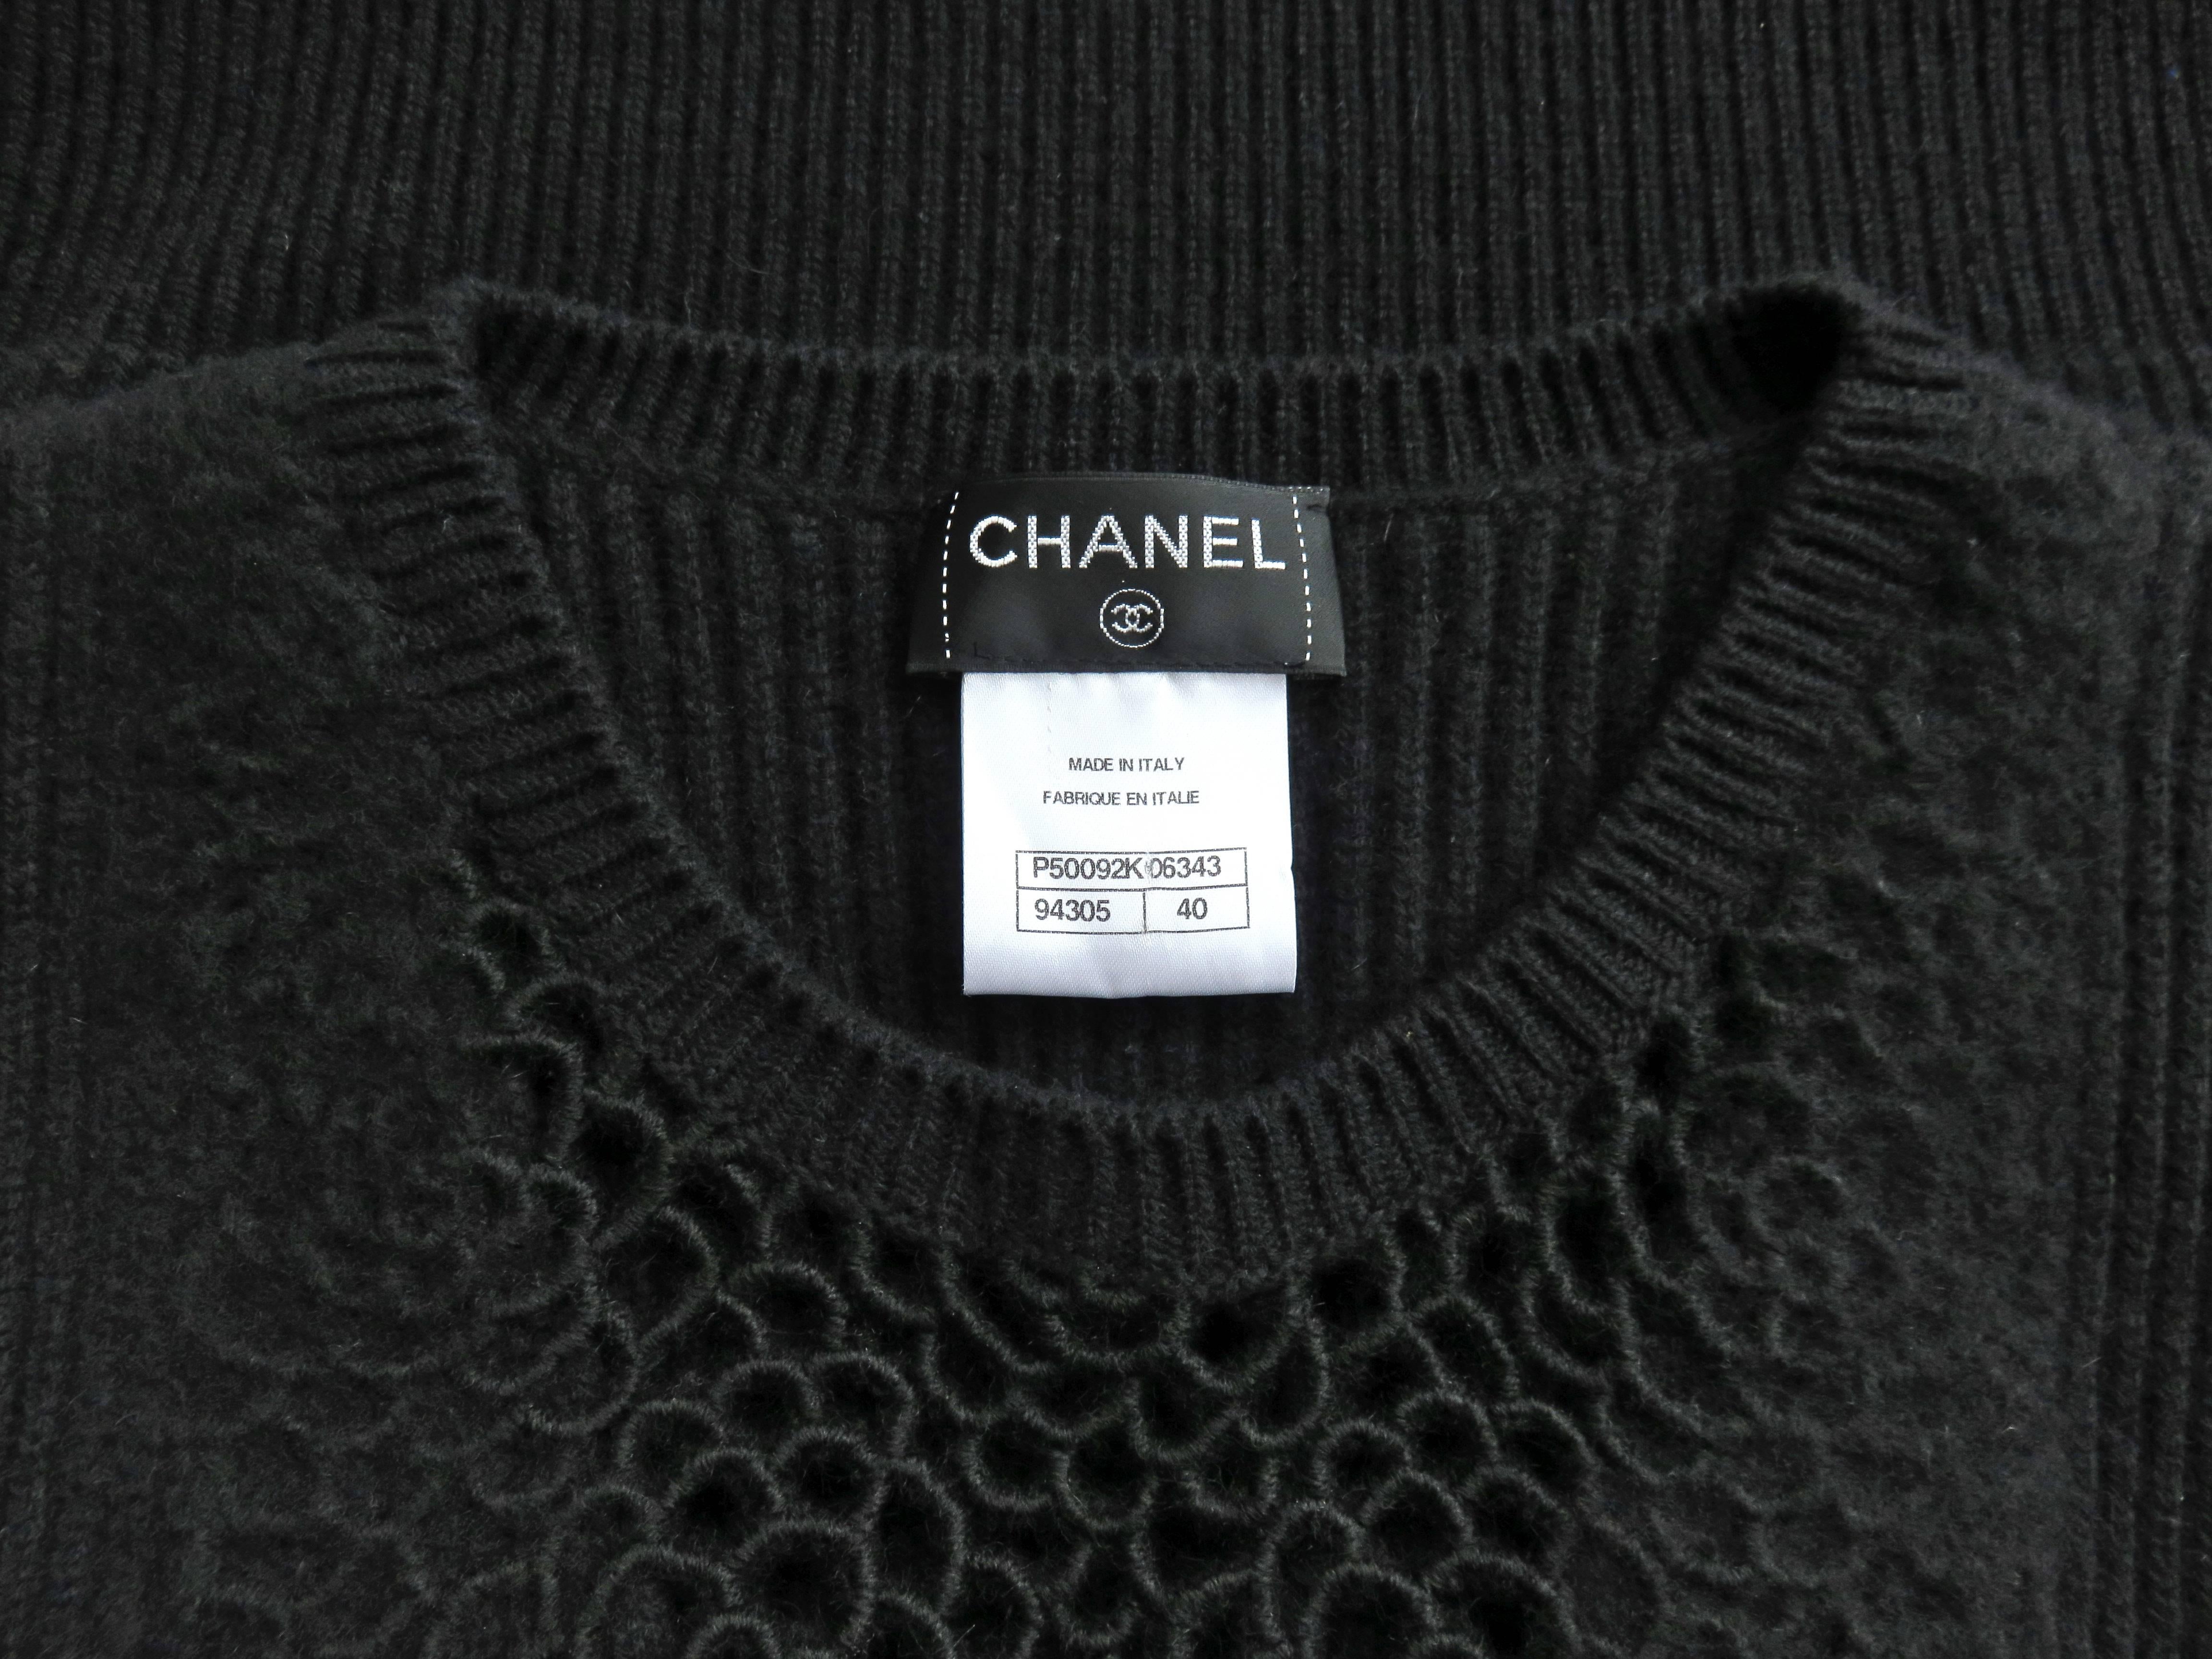 CHANEL PARIS Embroidered Camellia cashmere sweater 2